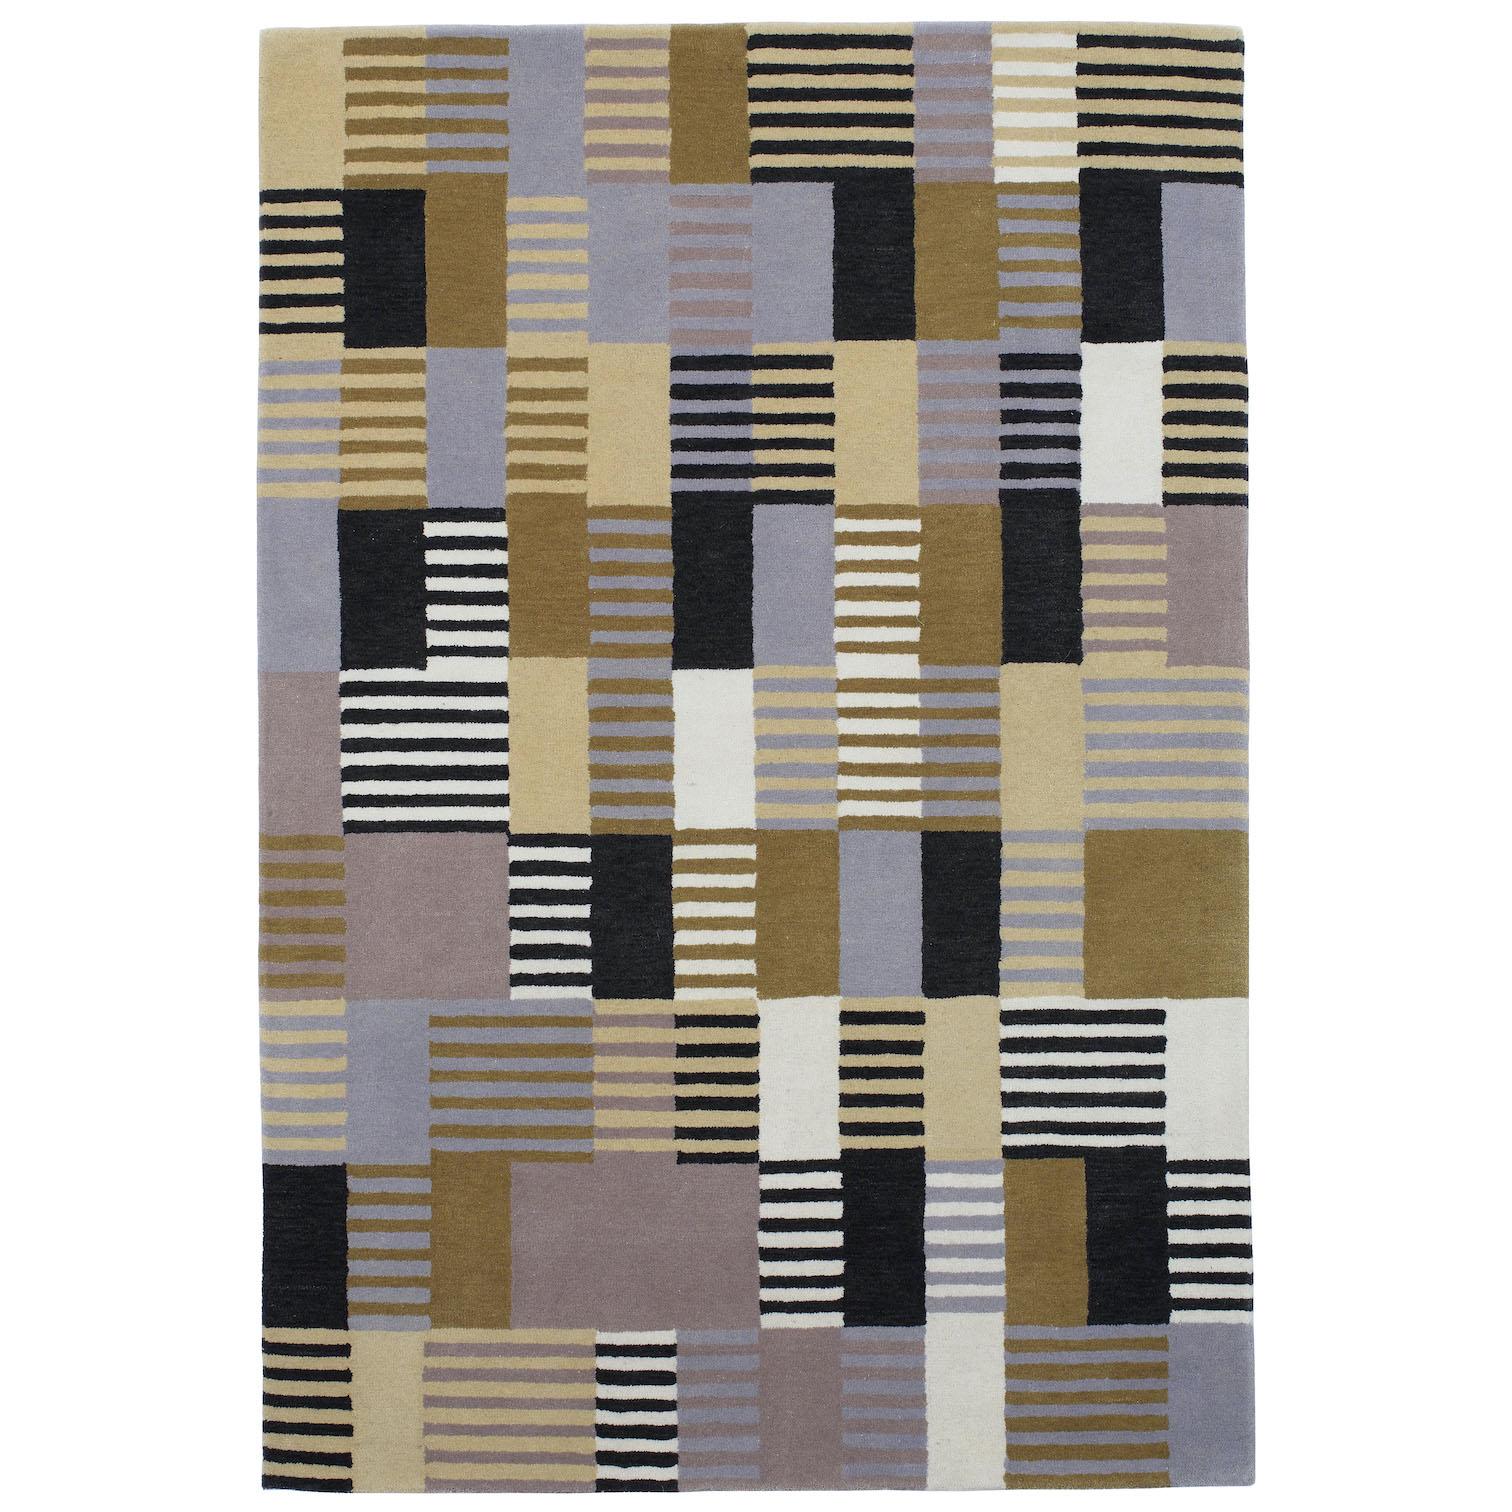 Bauhaus Design for Wall Hanging '1926' Rug by Anni Albers